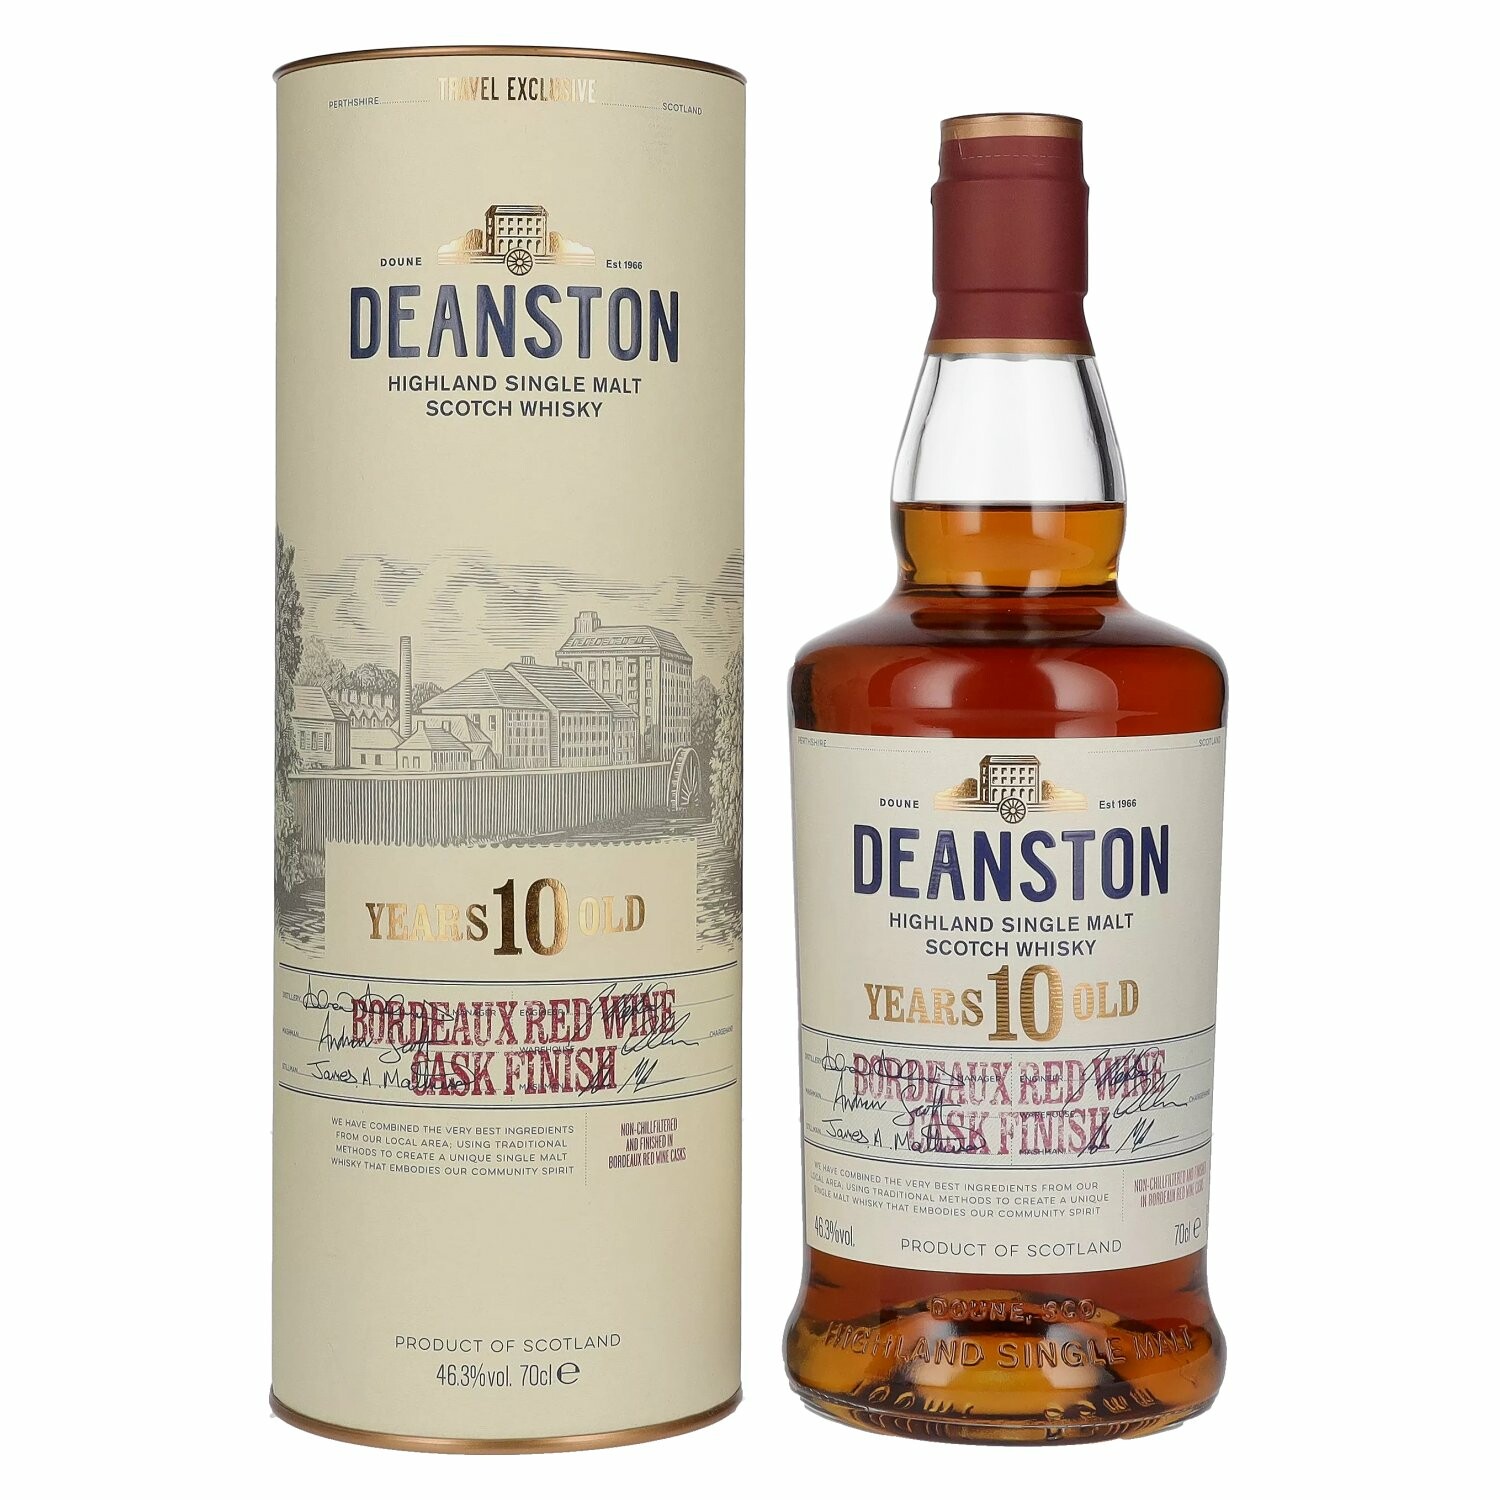 Deanston 10 Years Old Highland Single Malt Bordeaux Red Wine Cask Finish 46,3% Vol. 0,7l in Giftbox